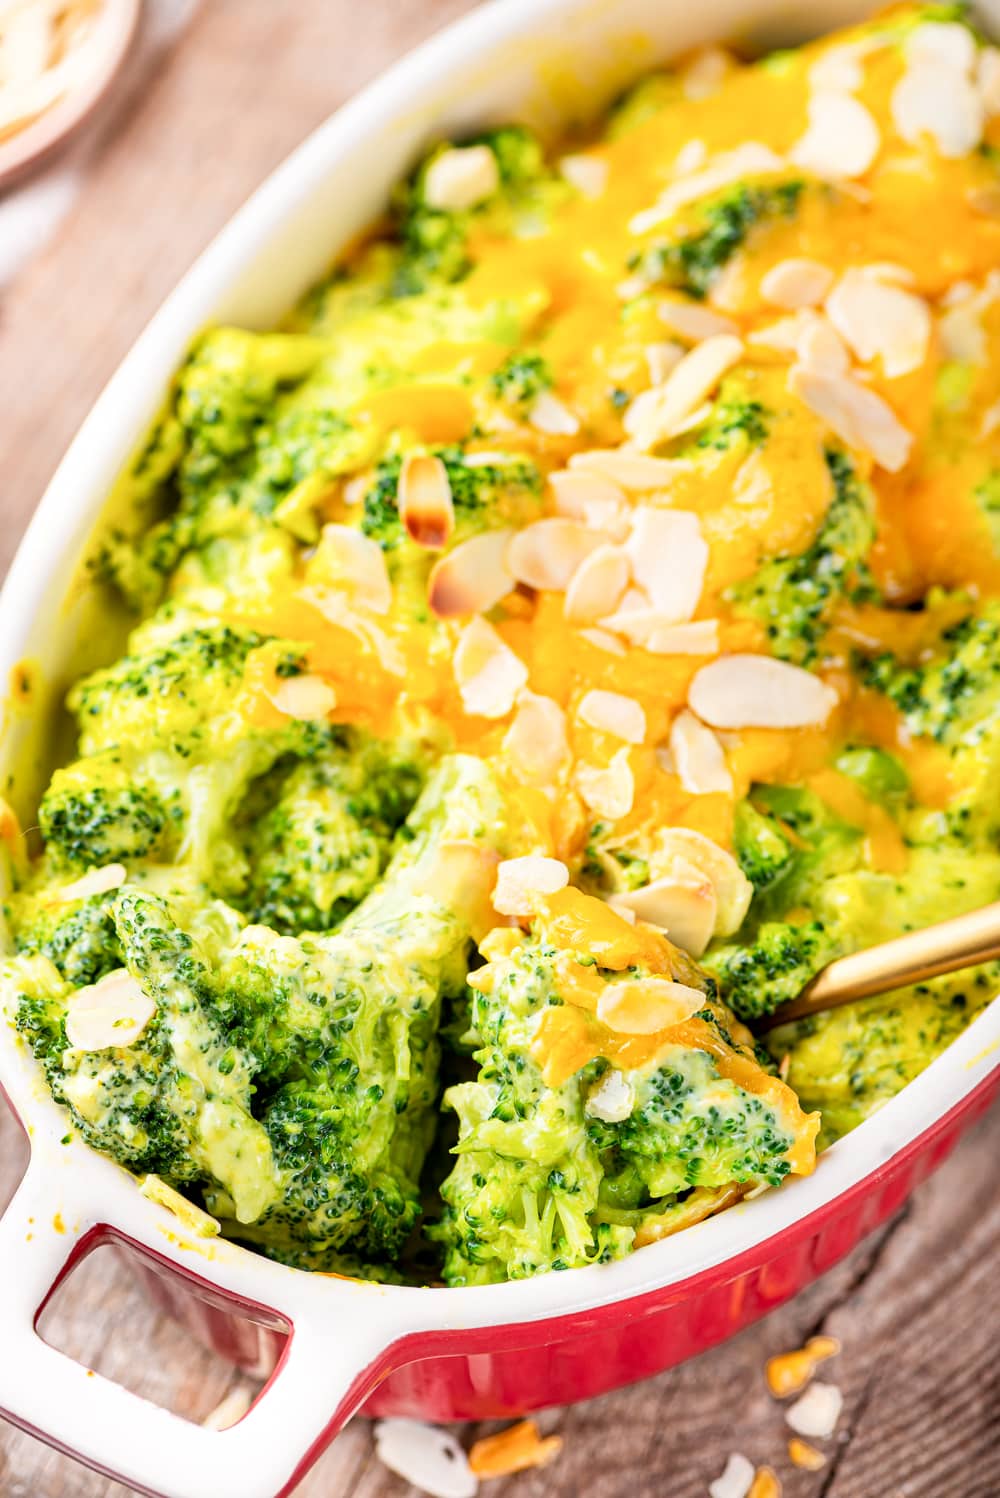 Broccoli florets covered in cheese about to be served from a casserole dish with a golden spoon.